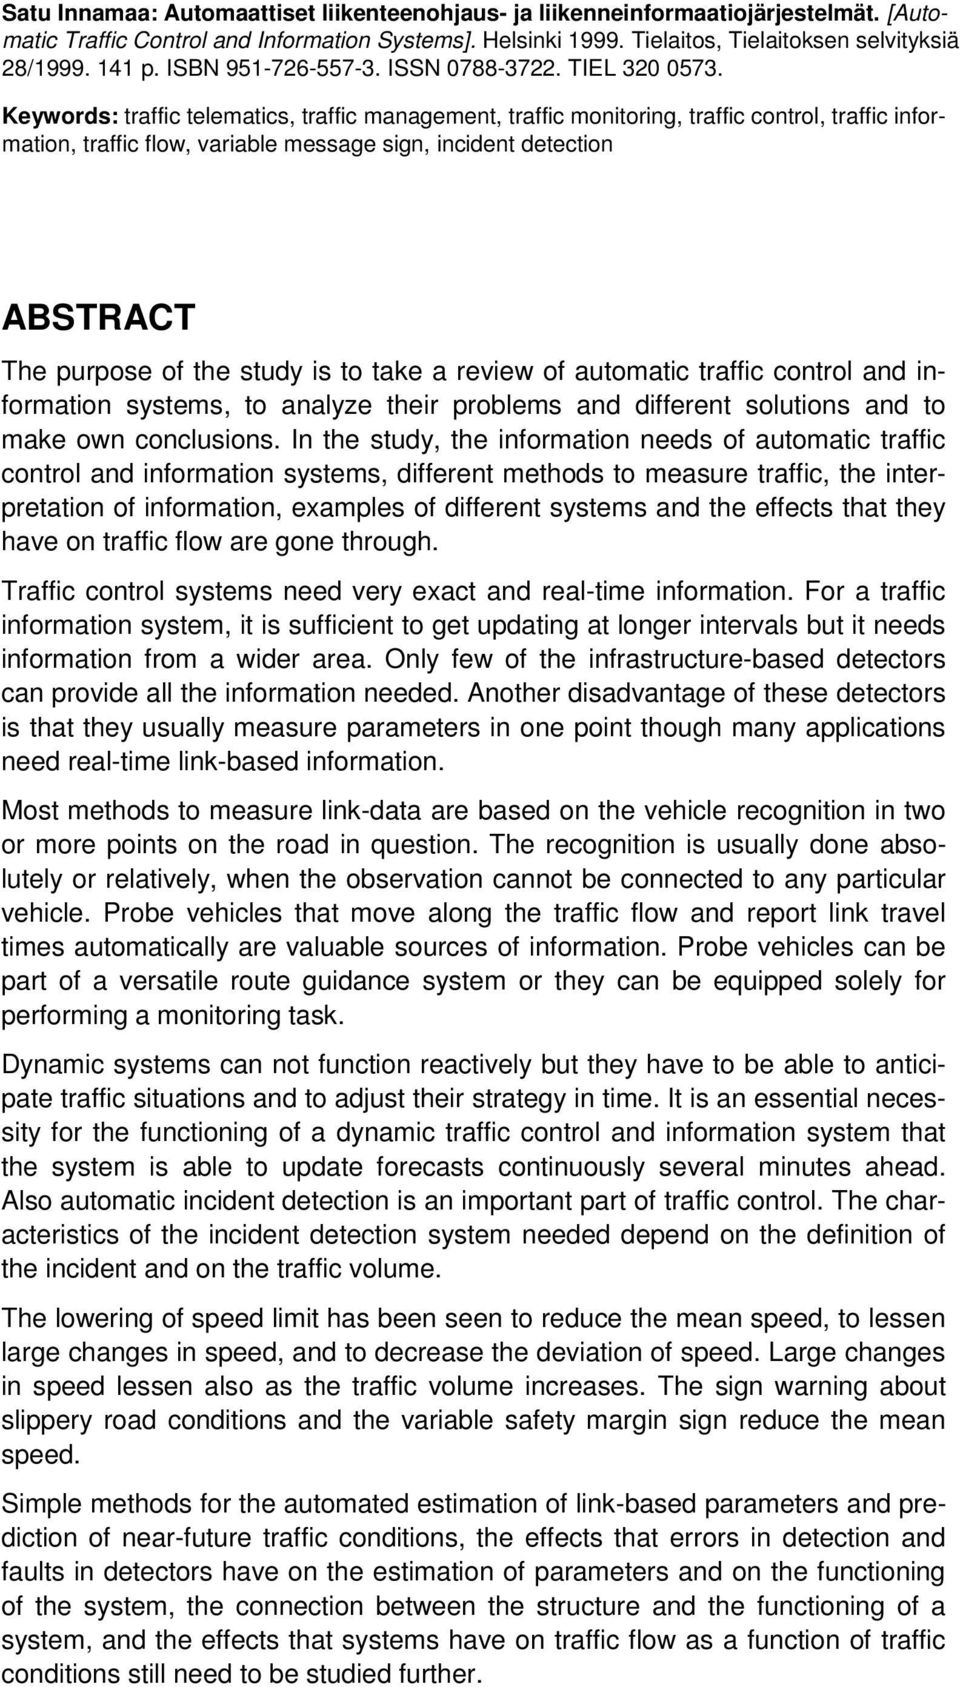 Keywords: traffic telematics, traffic management, traffic monitoring, traffic control, traffic information, traffic flow, variable message sign, incident detection ABSTRACT The purpose of the study